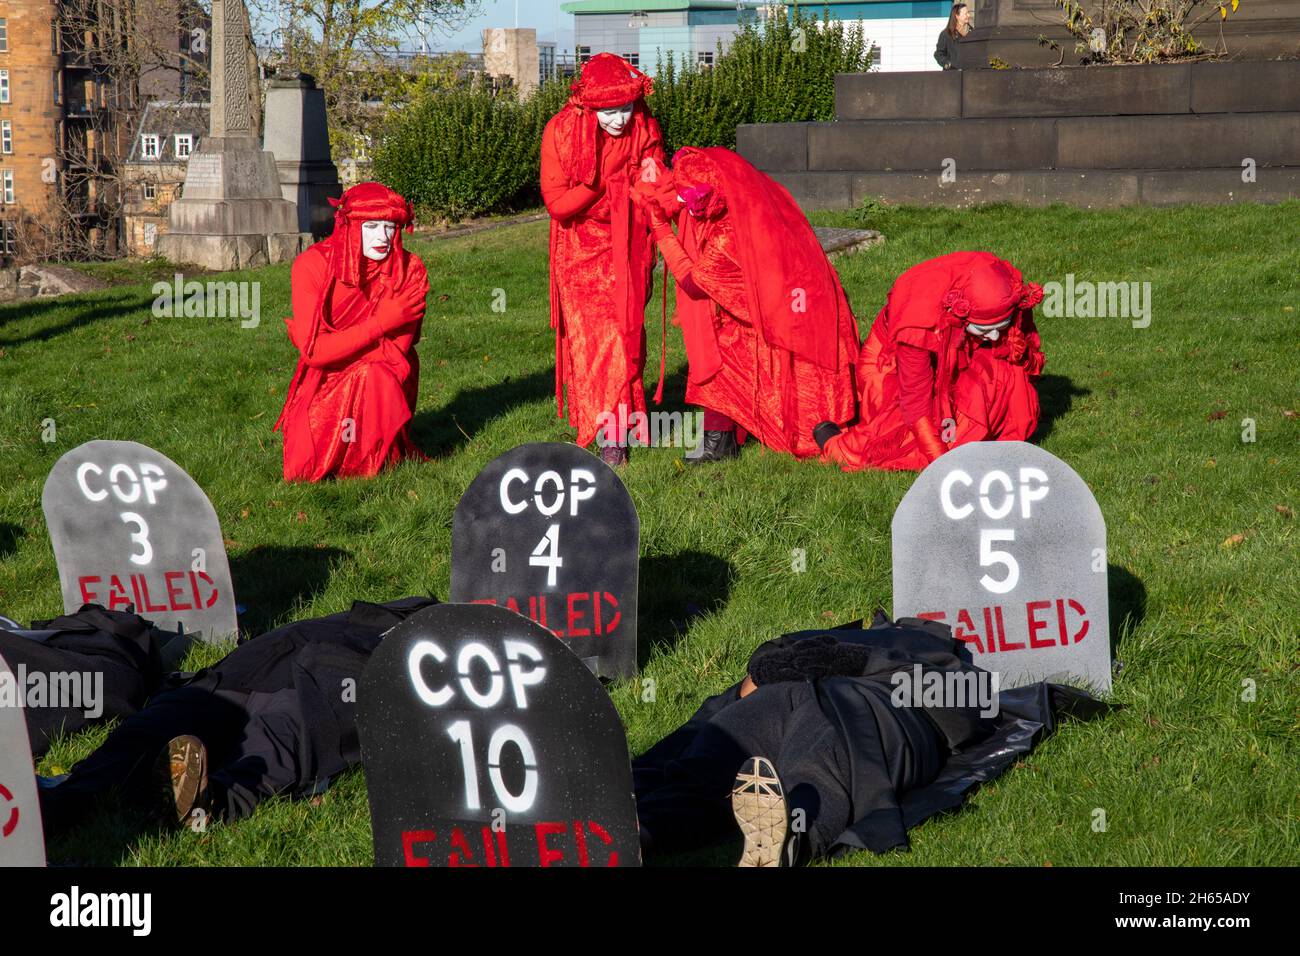 The Red Rebel Brigade join the Blue Rebel Brigade at the Glasgow Necropolis graveyard for the funerary of COP26. The weeping climate activists feel that COP26 is a failure and have held a mock funeral for the summit. COP26 is laid to rest in a grave alongside all of the previous COP summits. Stock Photo